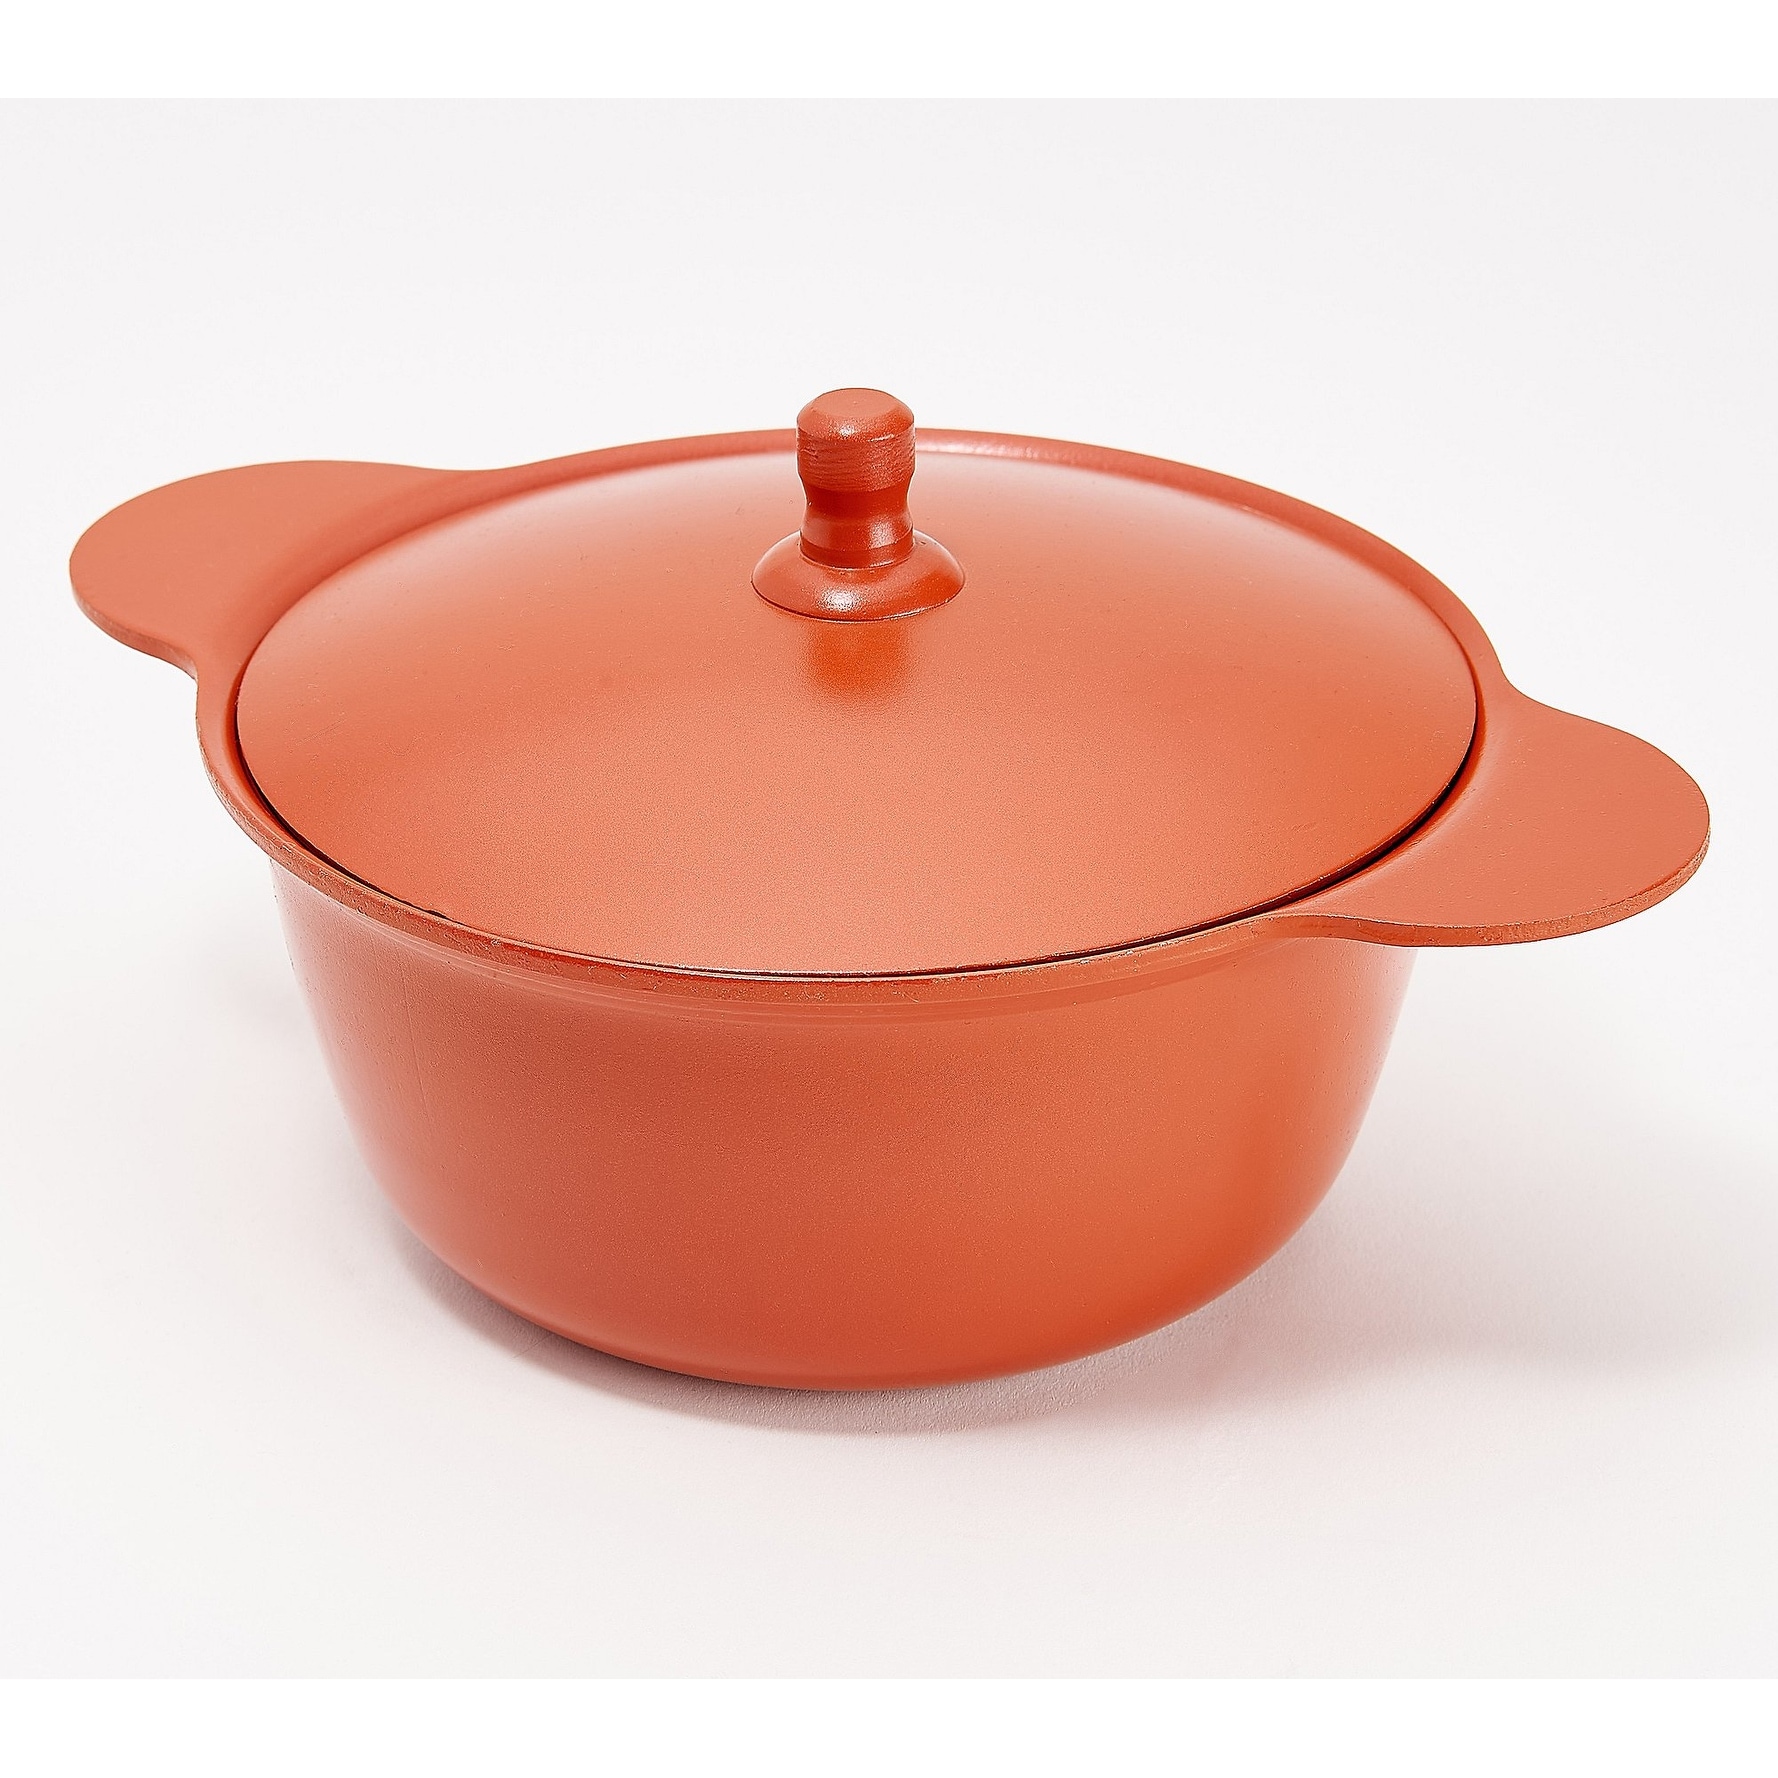 https://ak1.ostkcdn.com/images/products/is/images/direct/8055c84f447c17cea04f57de38c740789fe53940/Mad-Hungry-1.25-qt-Everyware-Buddy-Pot-with-Lid.jpg